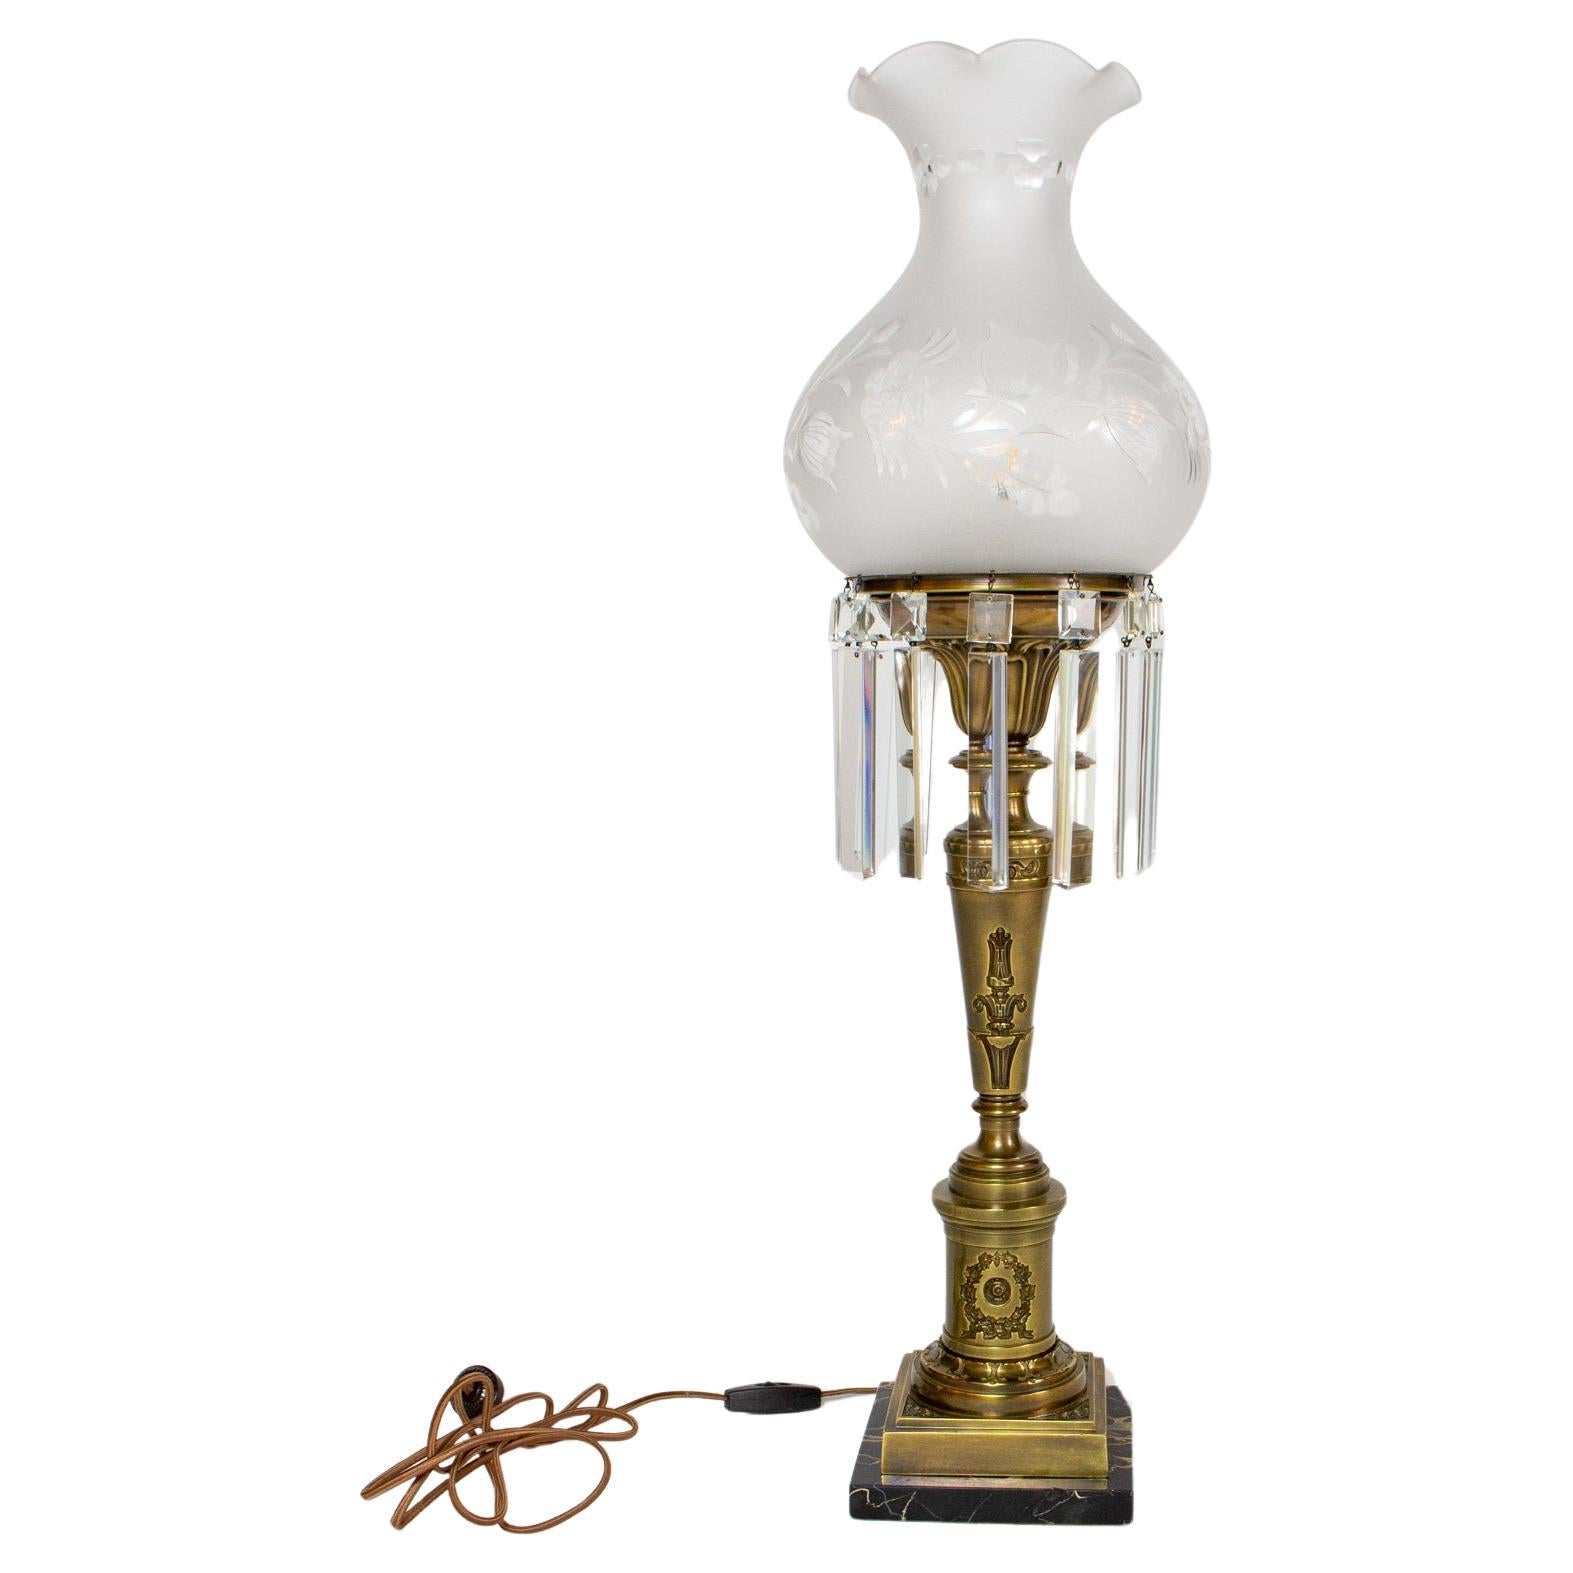 19th Century Messenger and Sons Bronze and Black Onyx Astral Lamp